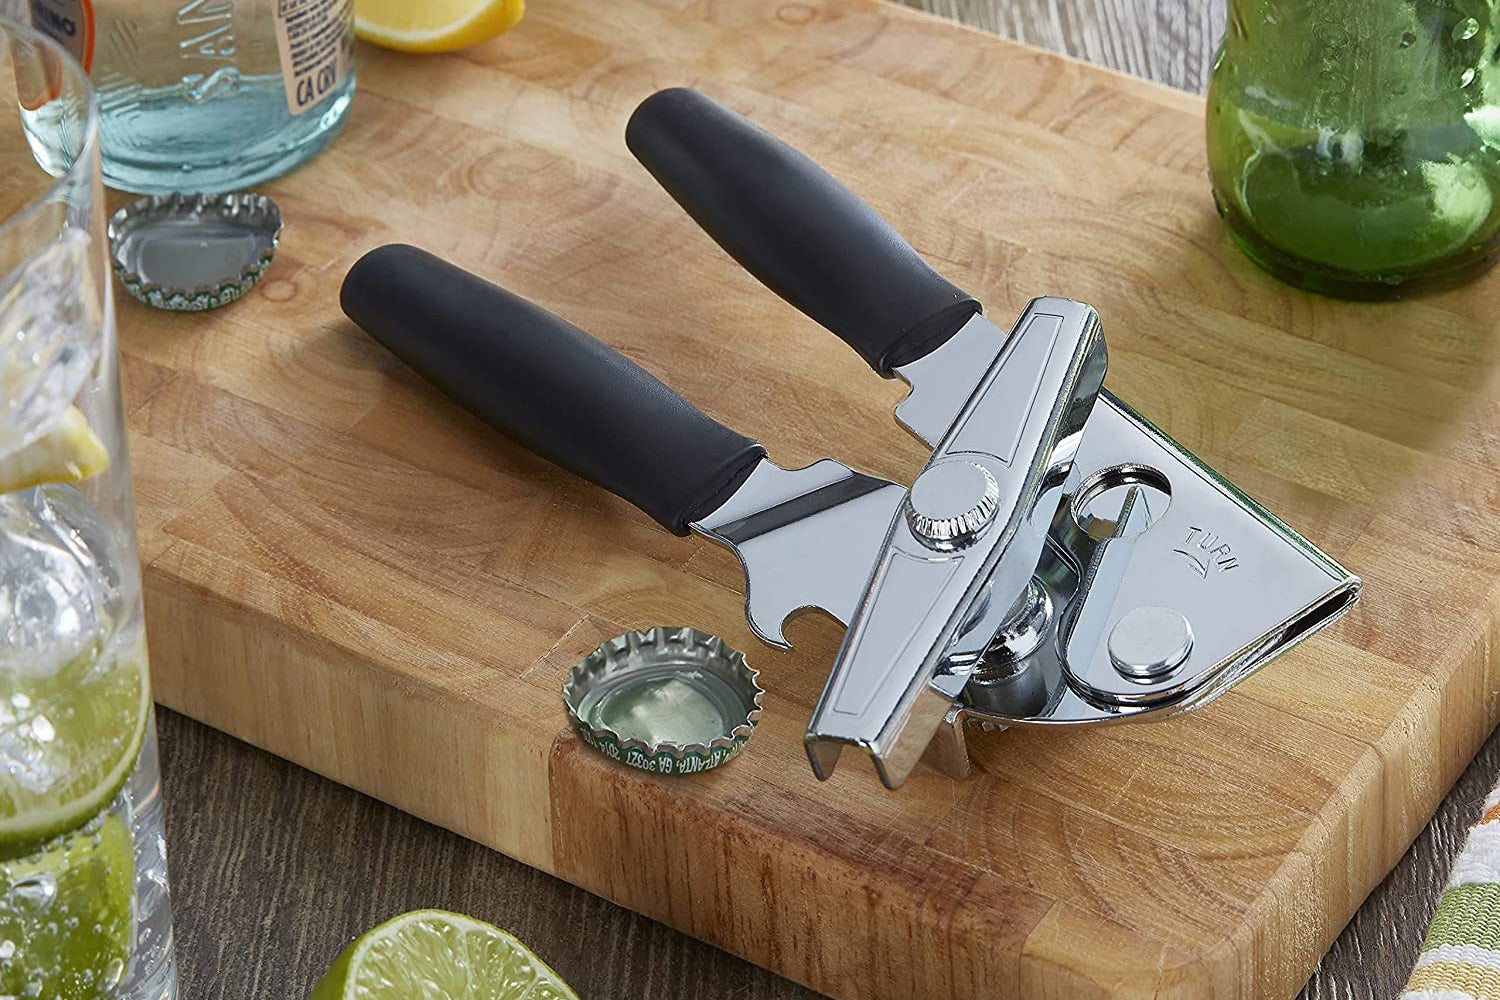 The Best Manual Can Openers to Power Through Your Pantry